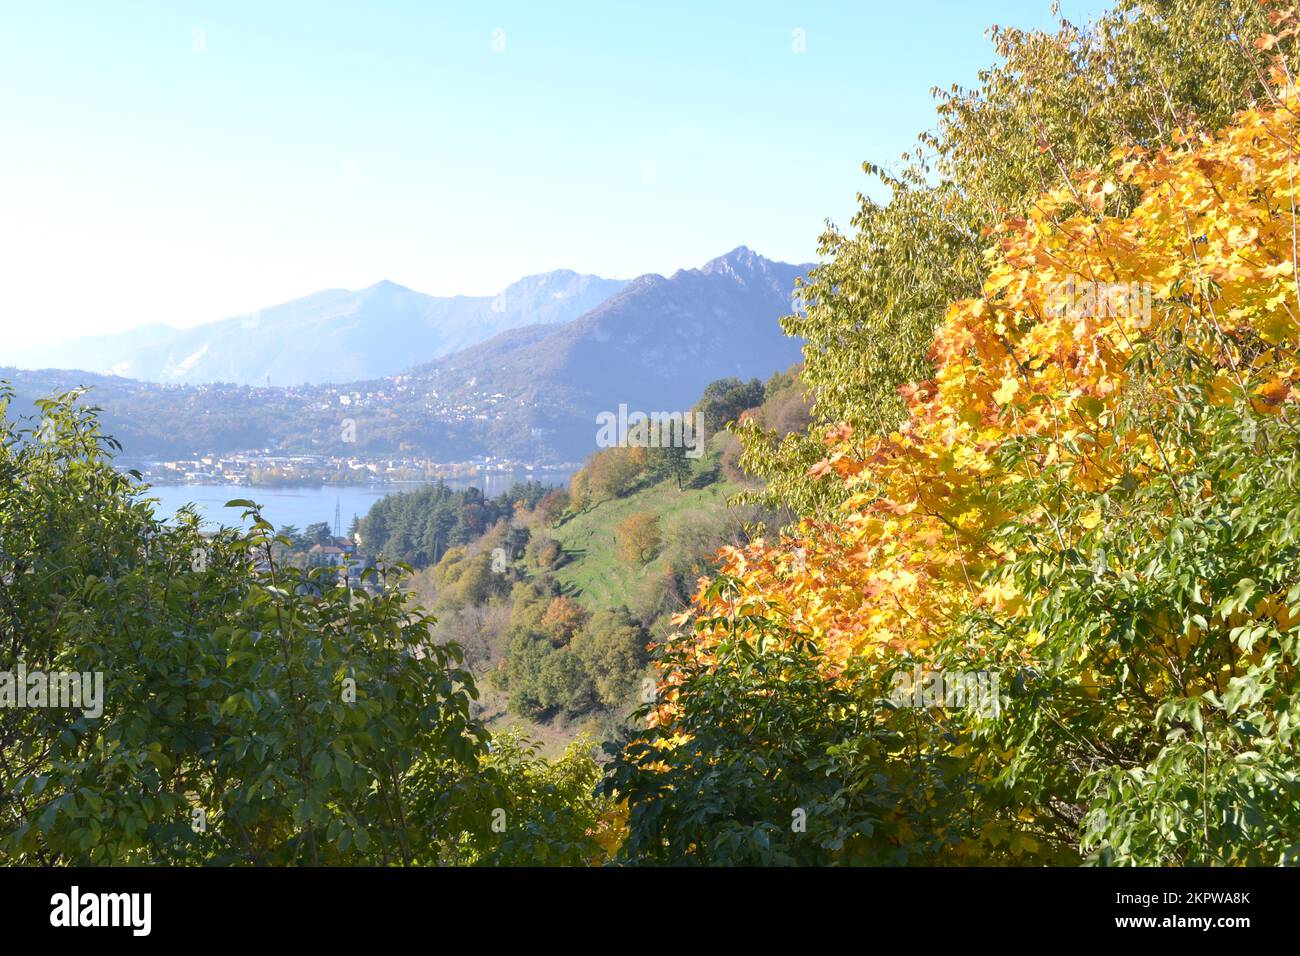 Beautiful autumn landscape in the mountains with trees in the foreground and multi profile of hill lines. Blur of the mountains and lake in background Stock Photo